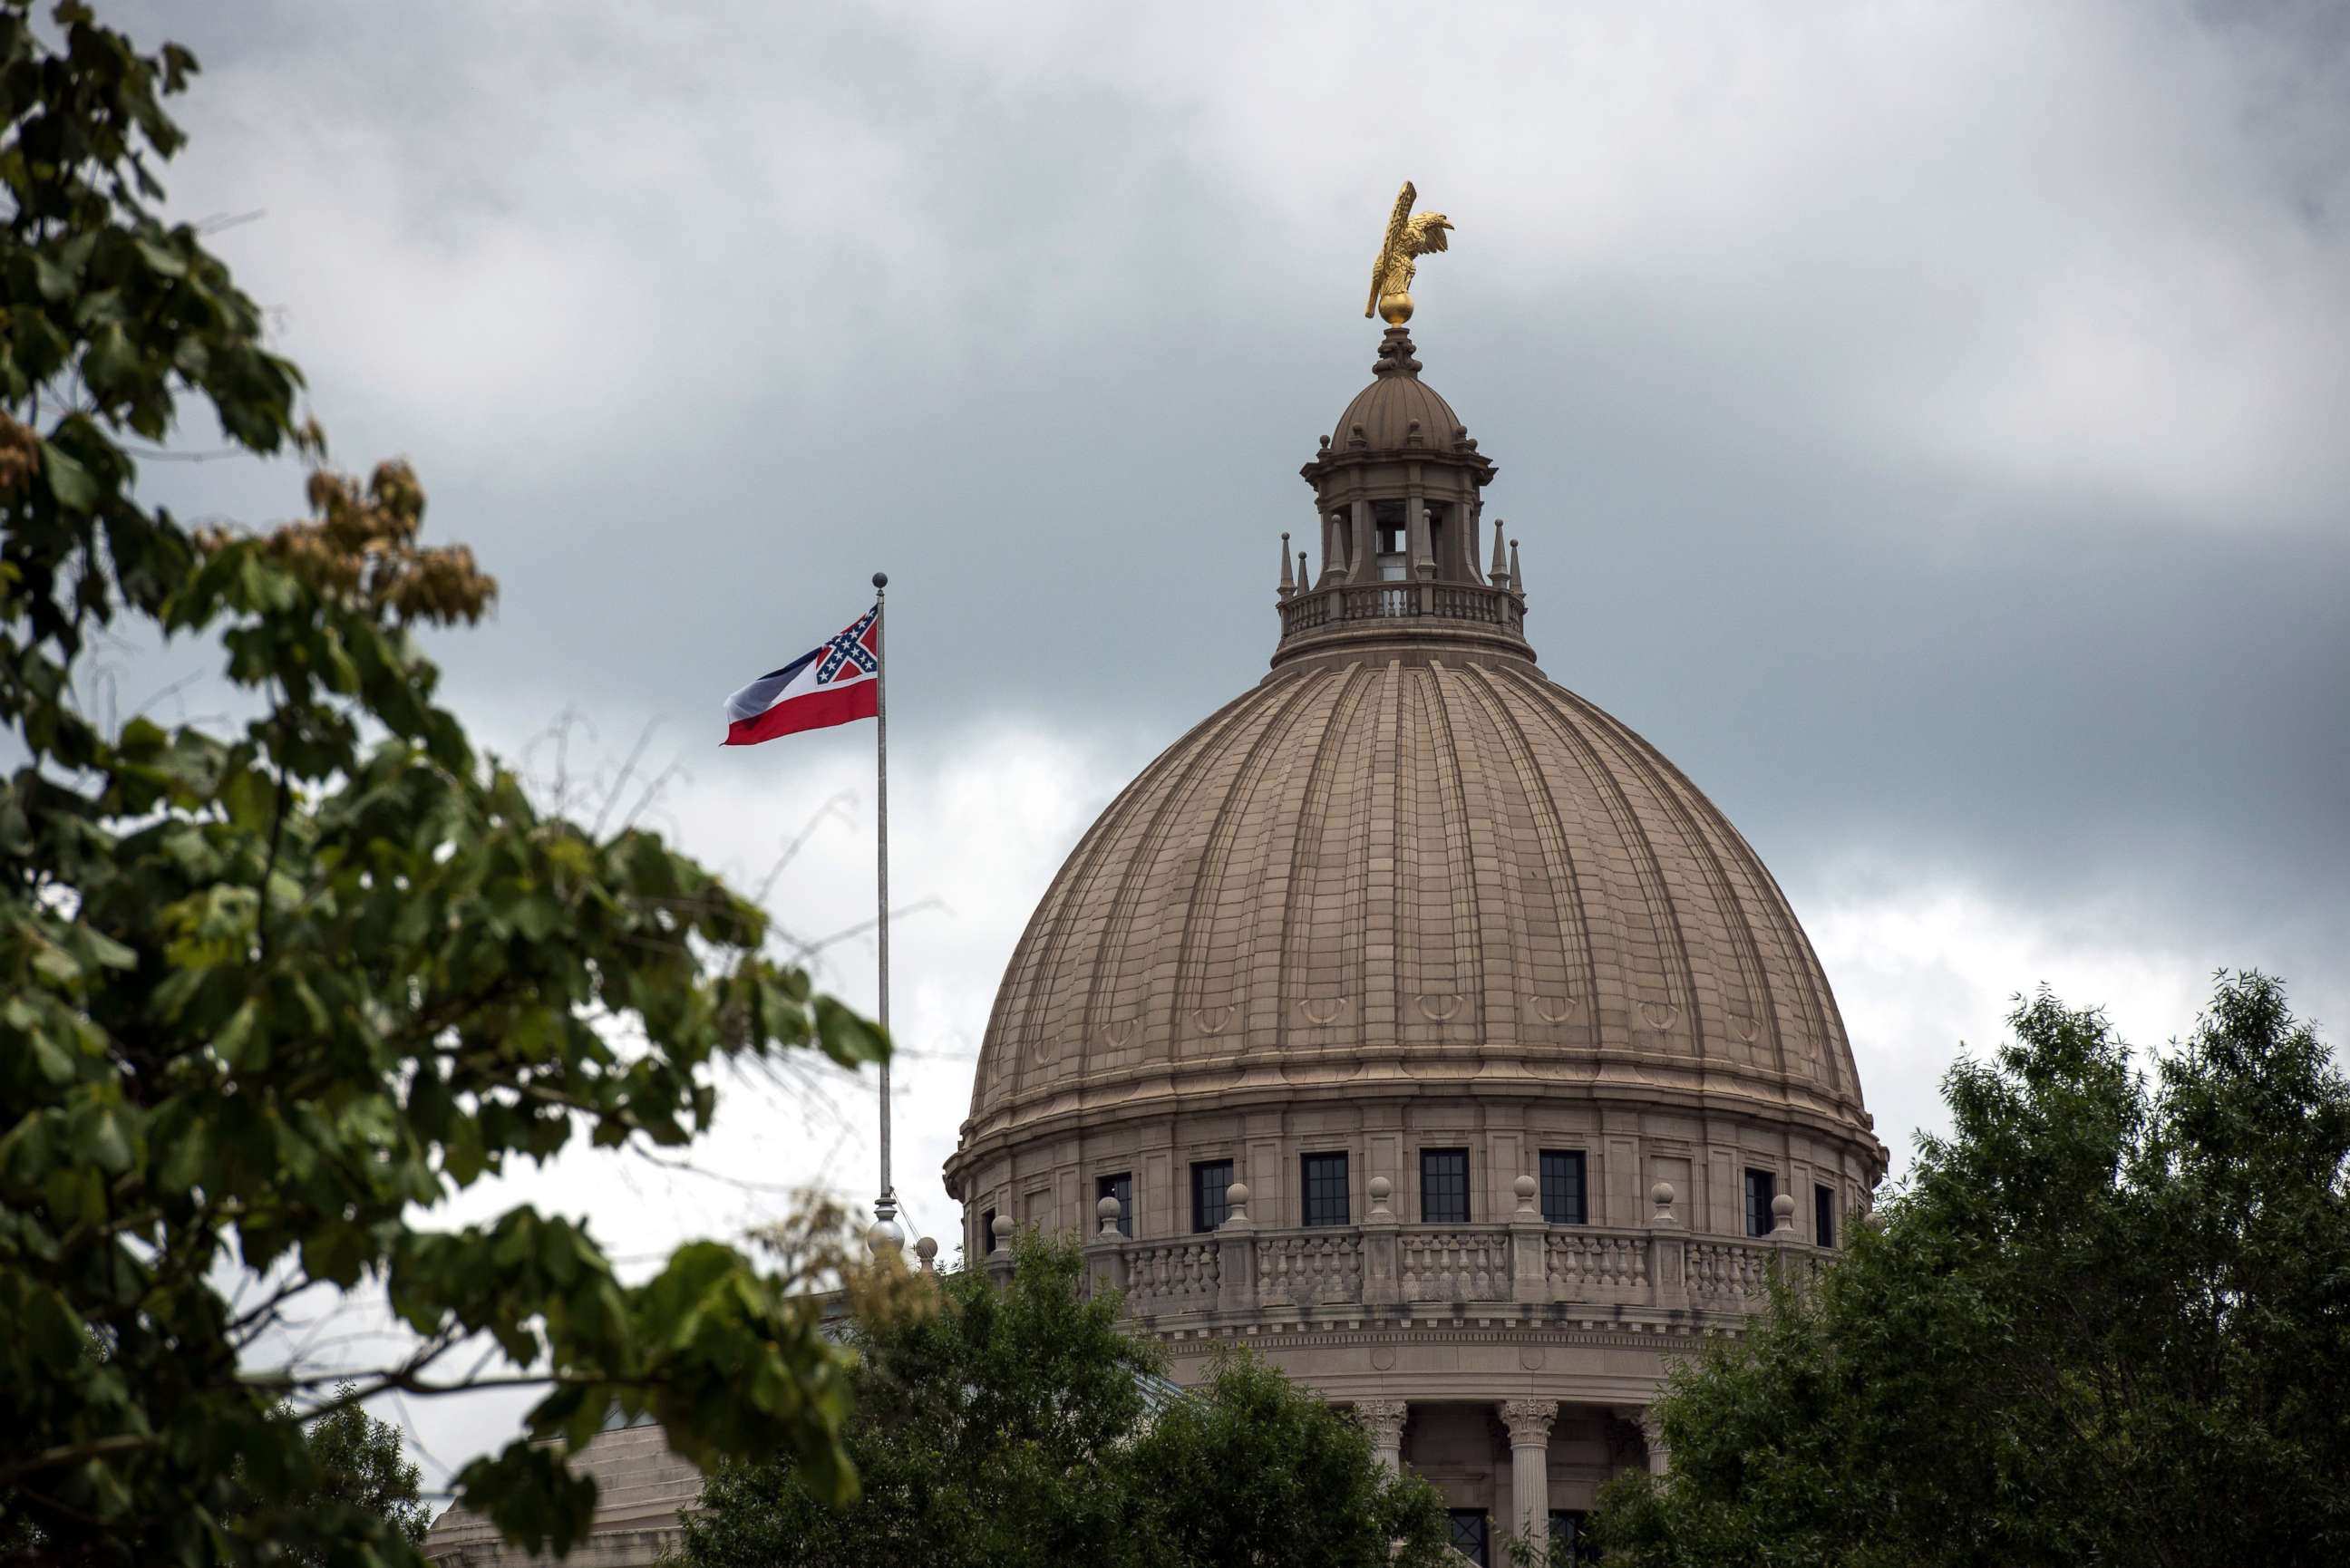 PHOTO: The state flag flies over the Mississippi State Capitol building in Jackson, Mississippi, June 29, 2020.